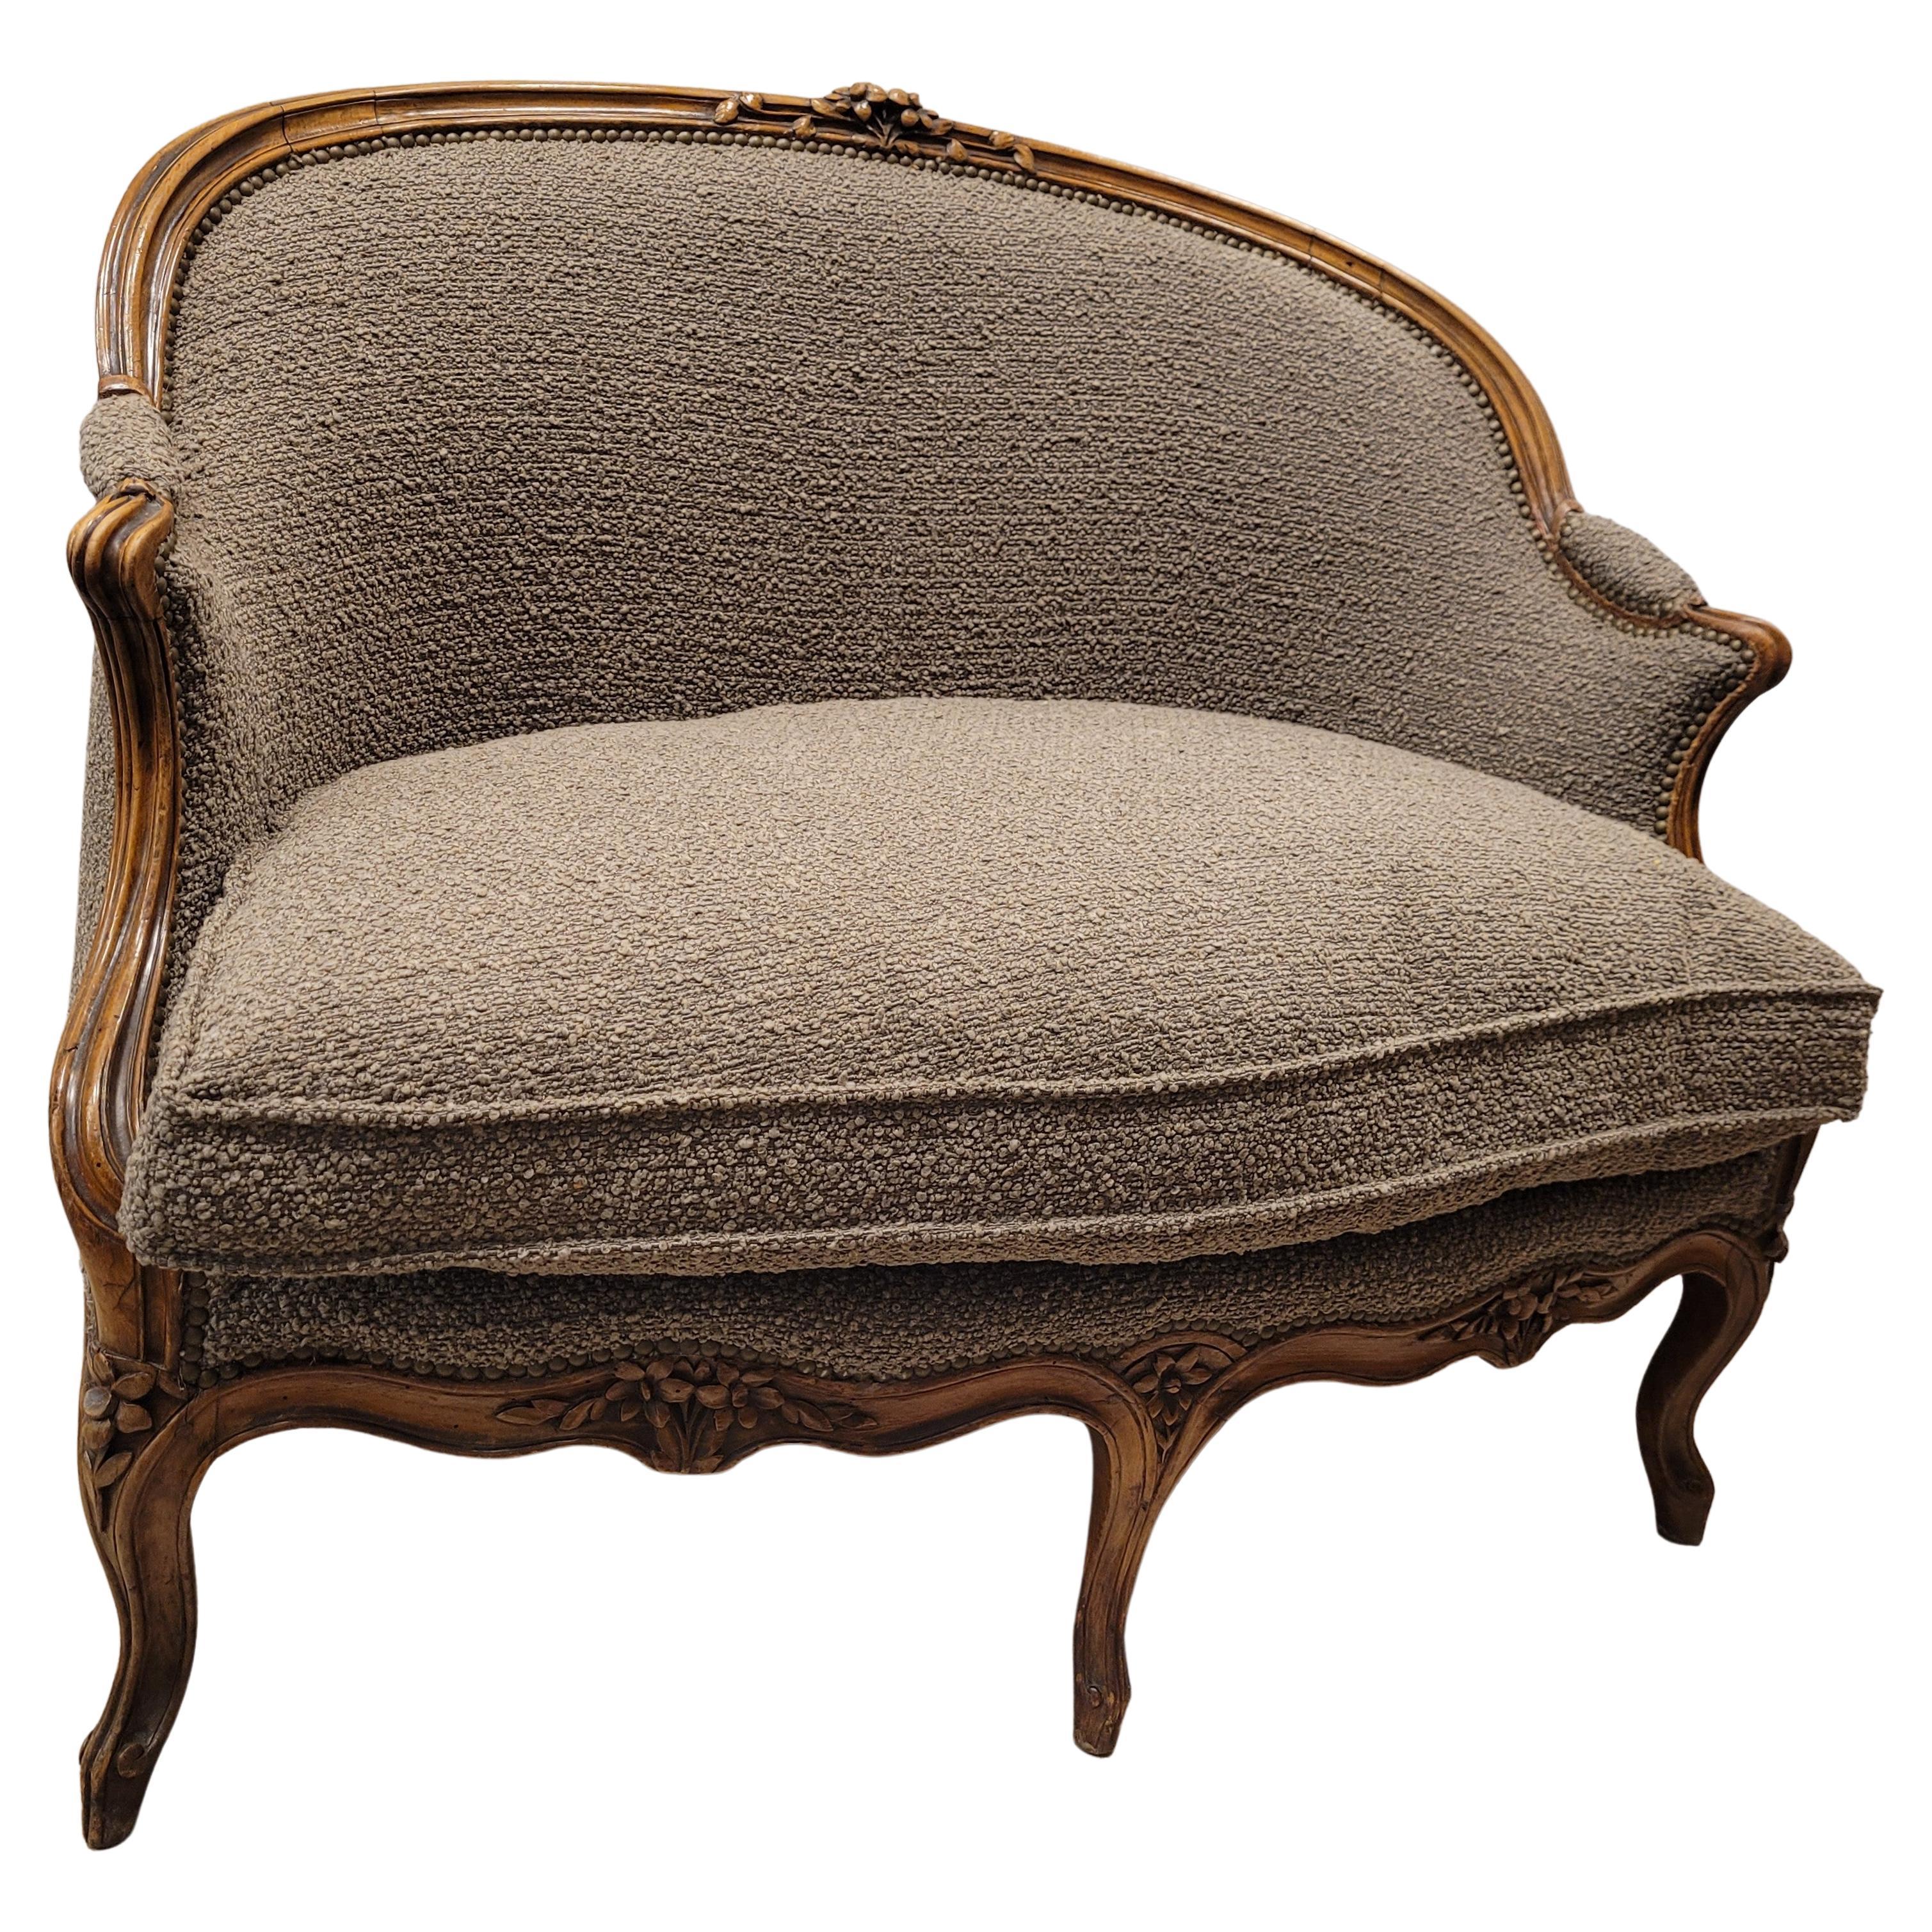 French Sofa -Canape Luis xv Mink Color, Wood  For Sale